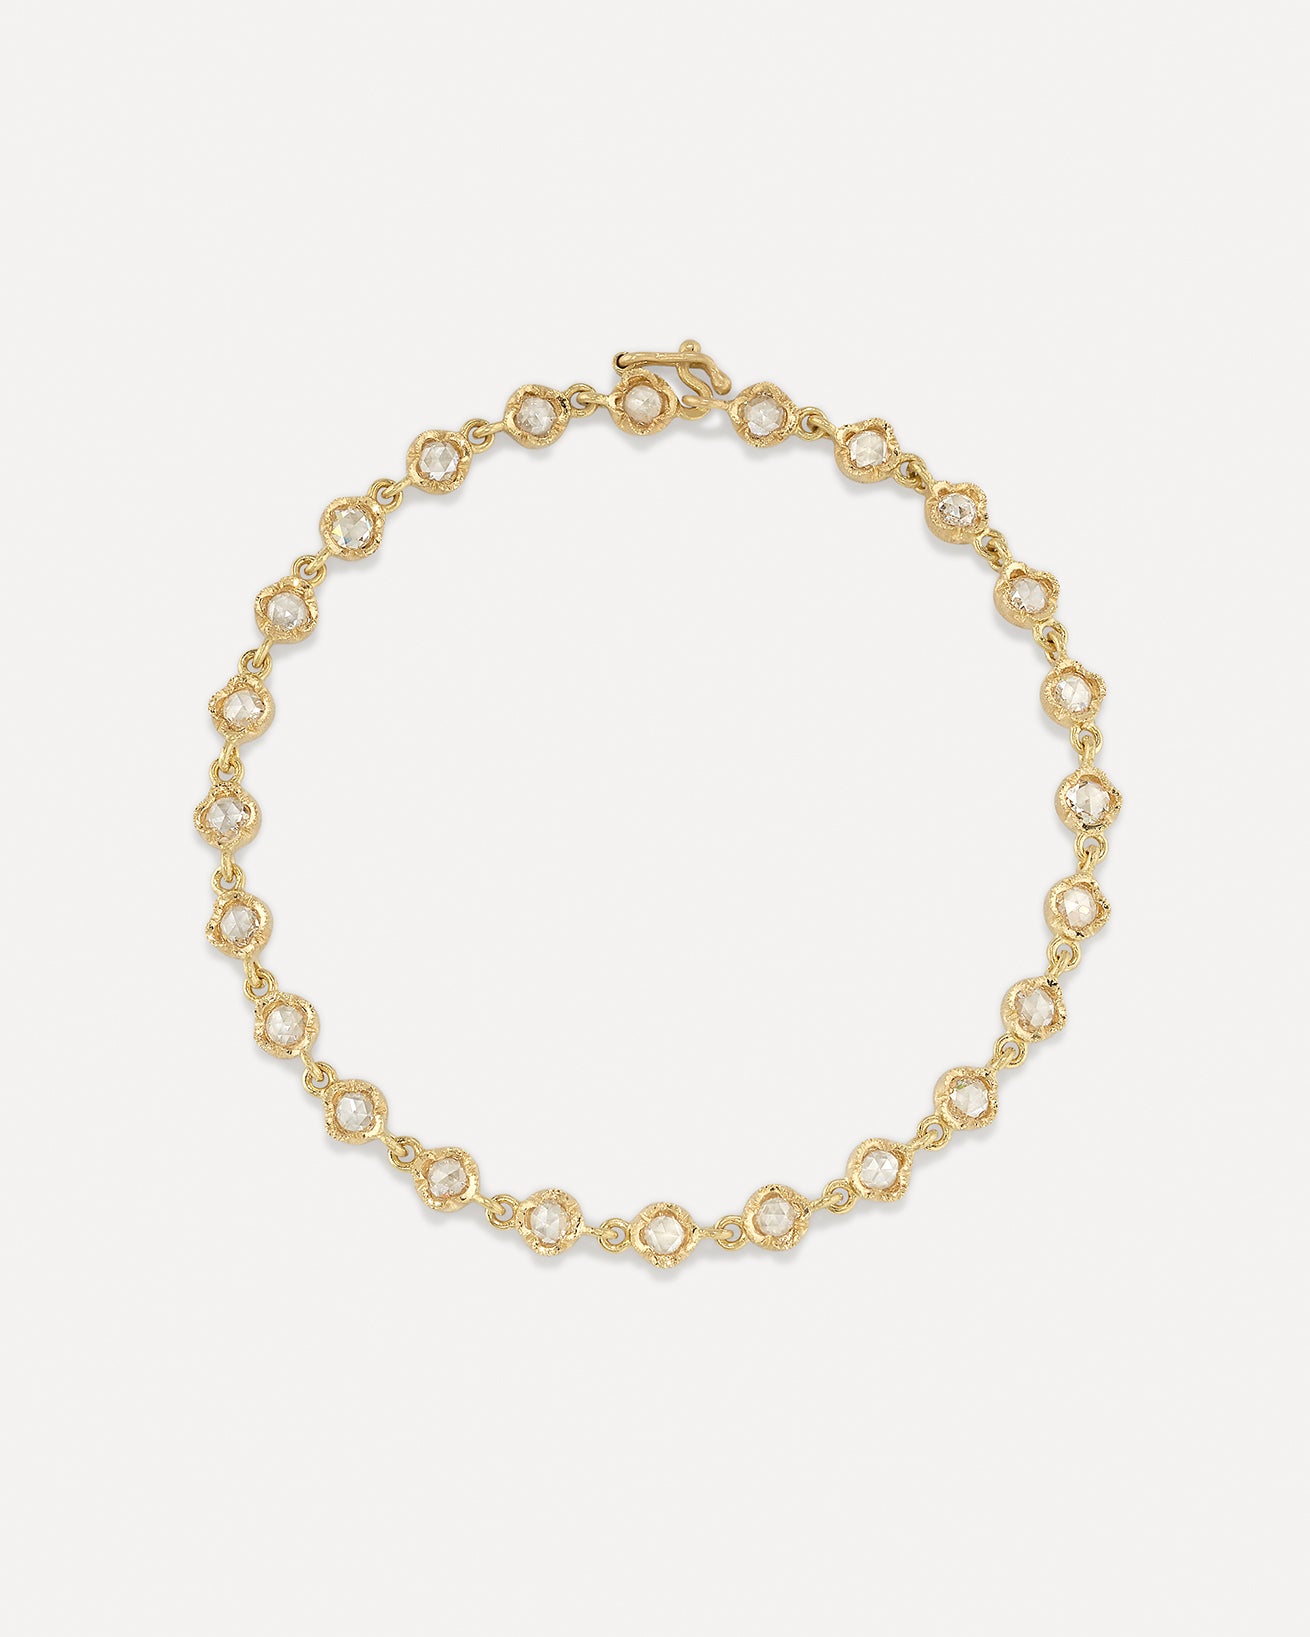 14k Valentino Tri-color Chain Bracelet/ Solid 14k Gold / Yellow Rose White  / Diamond Cut / 3 4 Mm / 7 8 Inch - Etsy